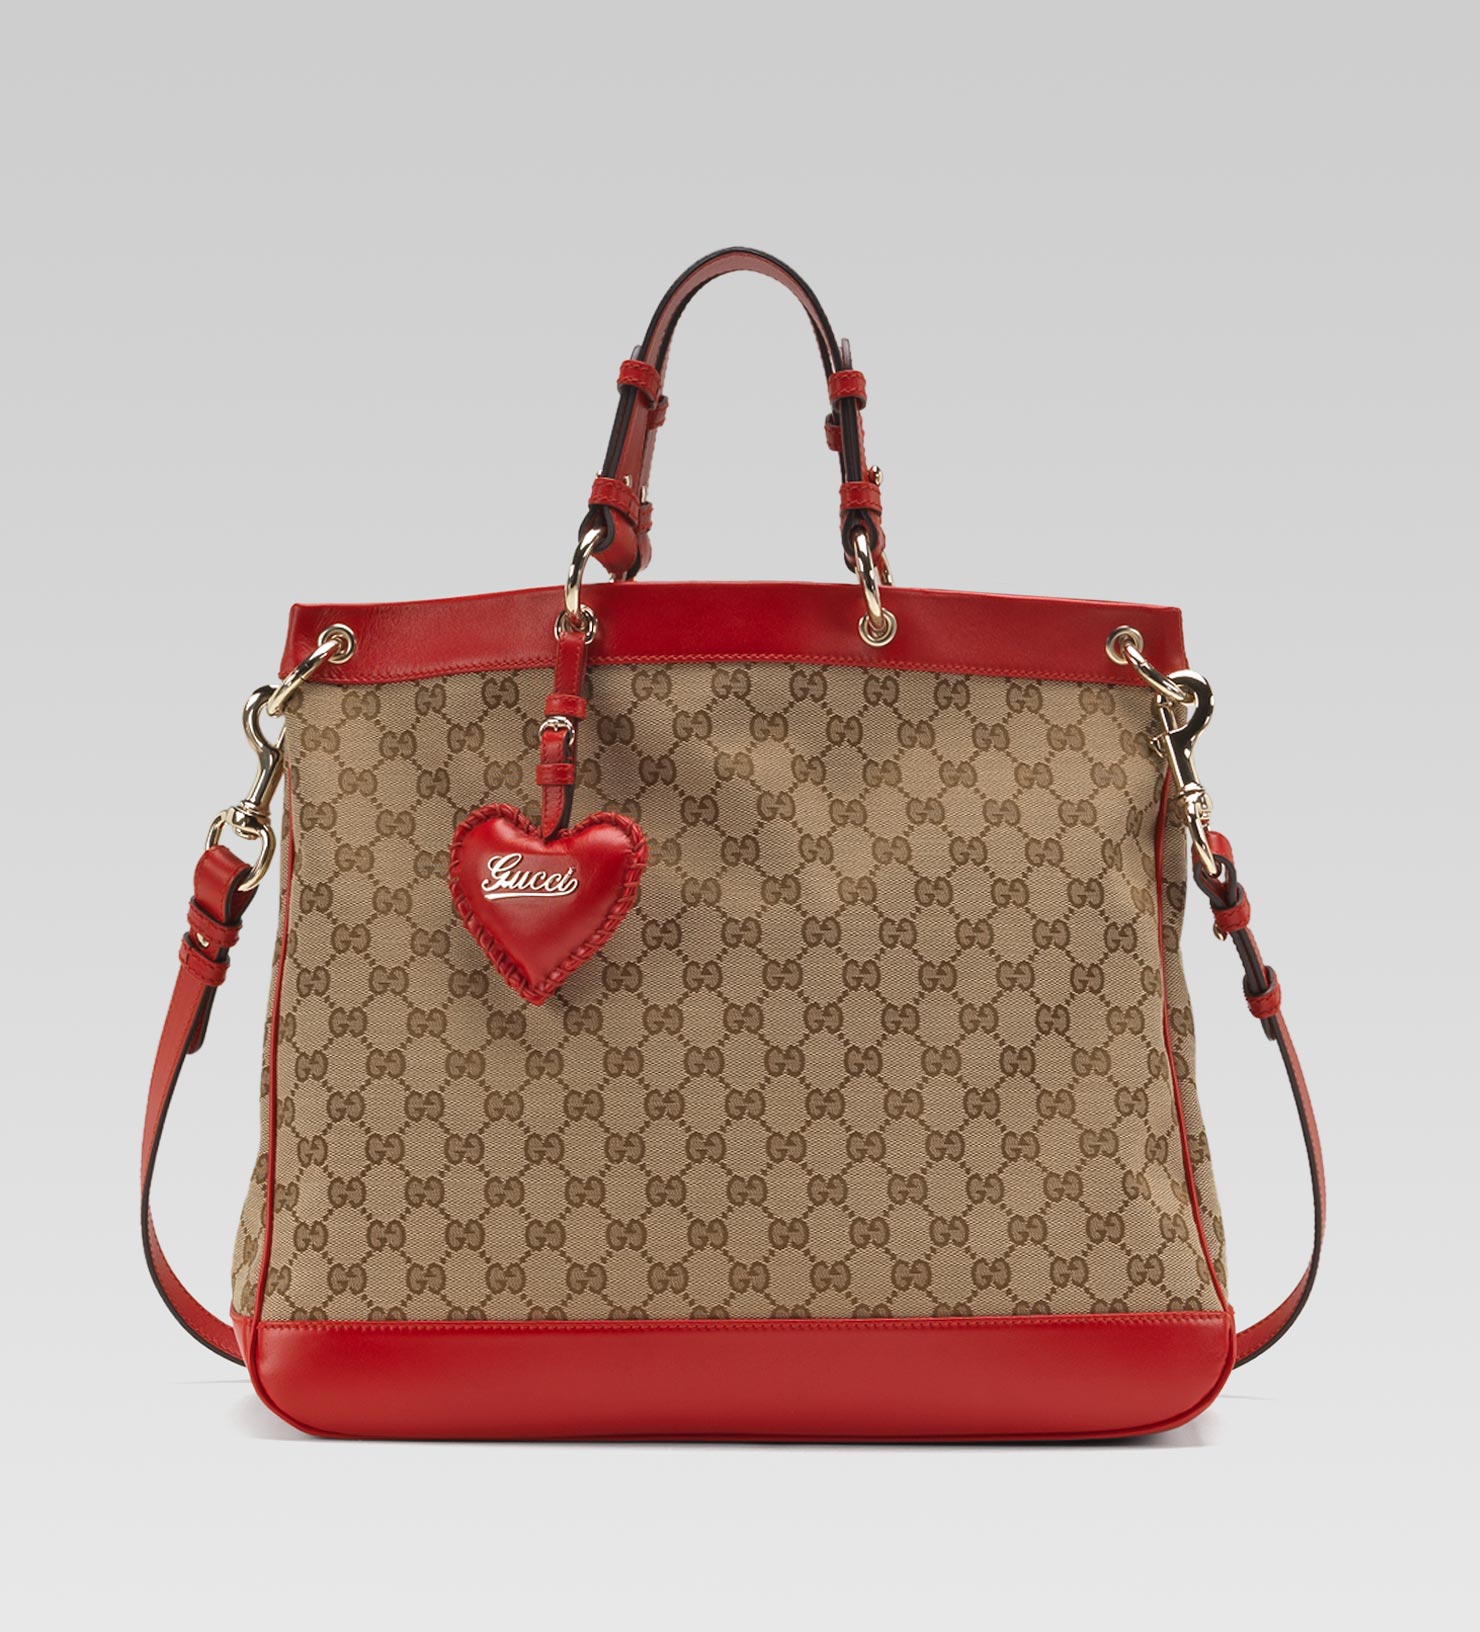 Lyst - Gucci Valentine Bag with Hand Stitched Heartshaped ...